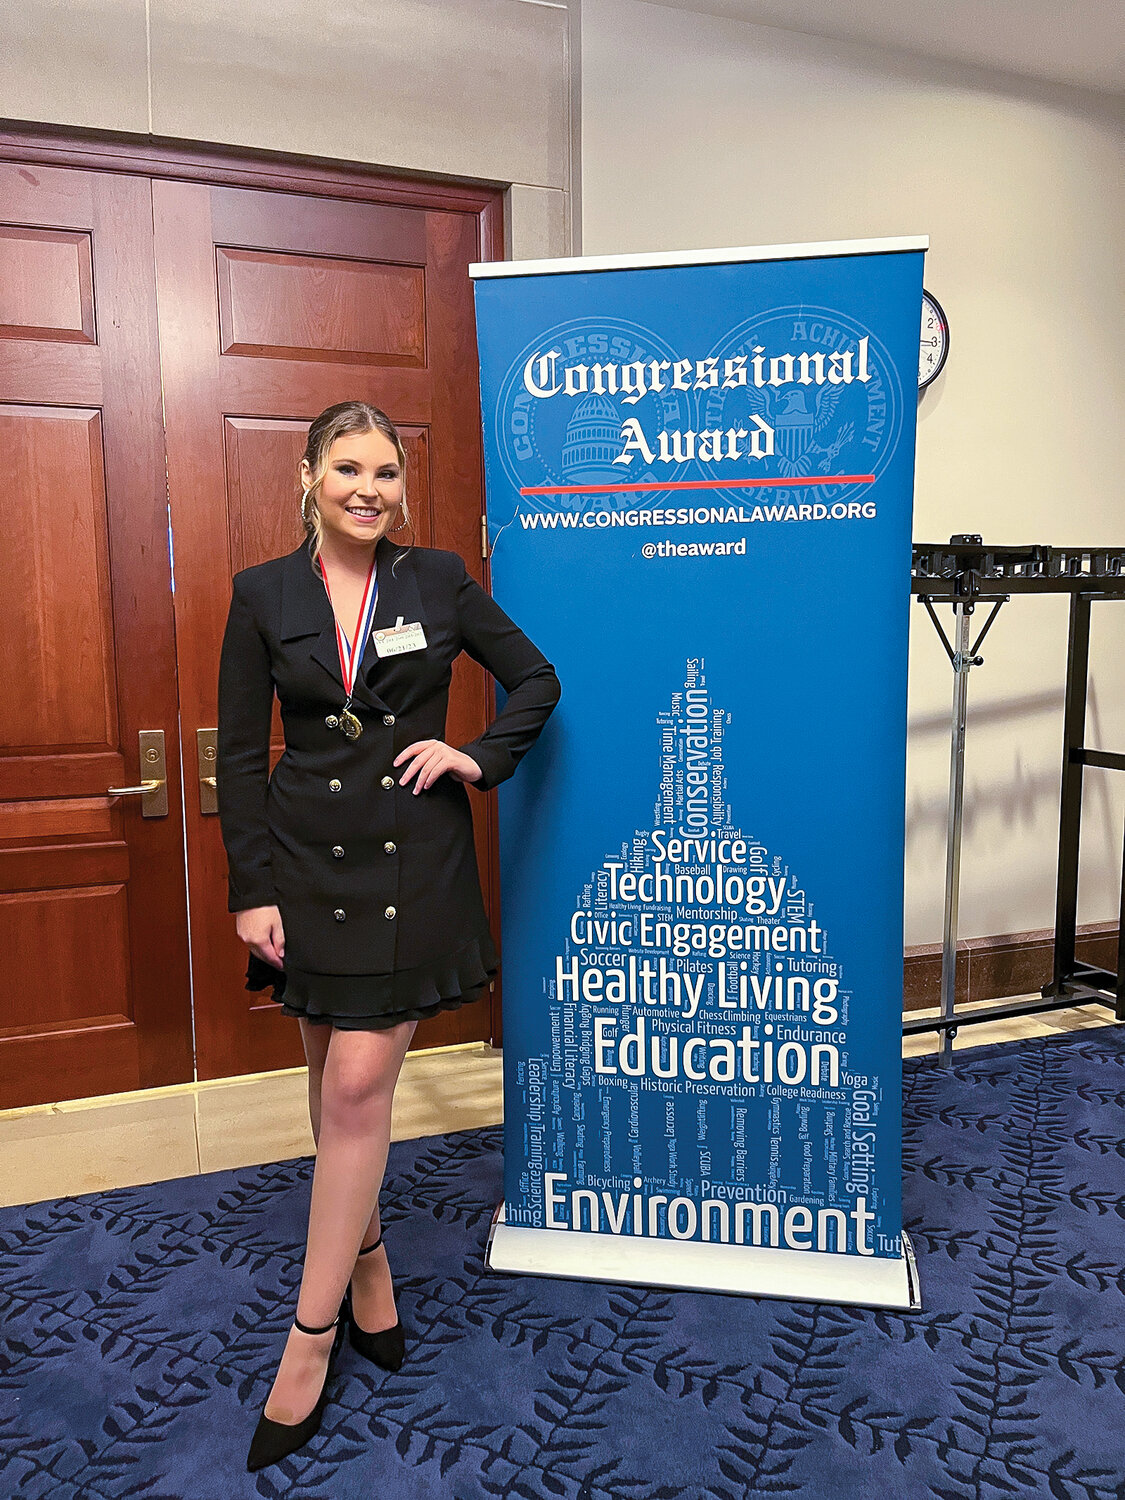 Natalie Worthy earned the Gold Congressional Award at the Congressional Award summit in Washington, D.C. between June 20 and June 22.